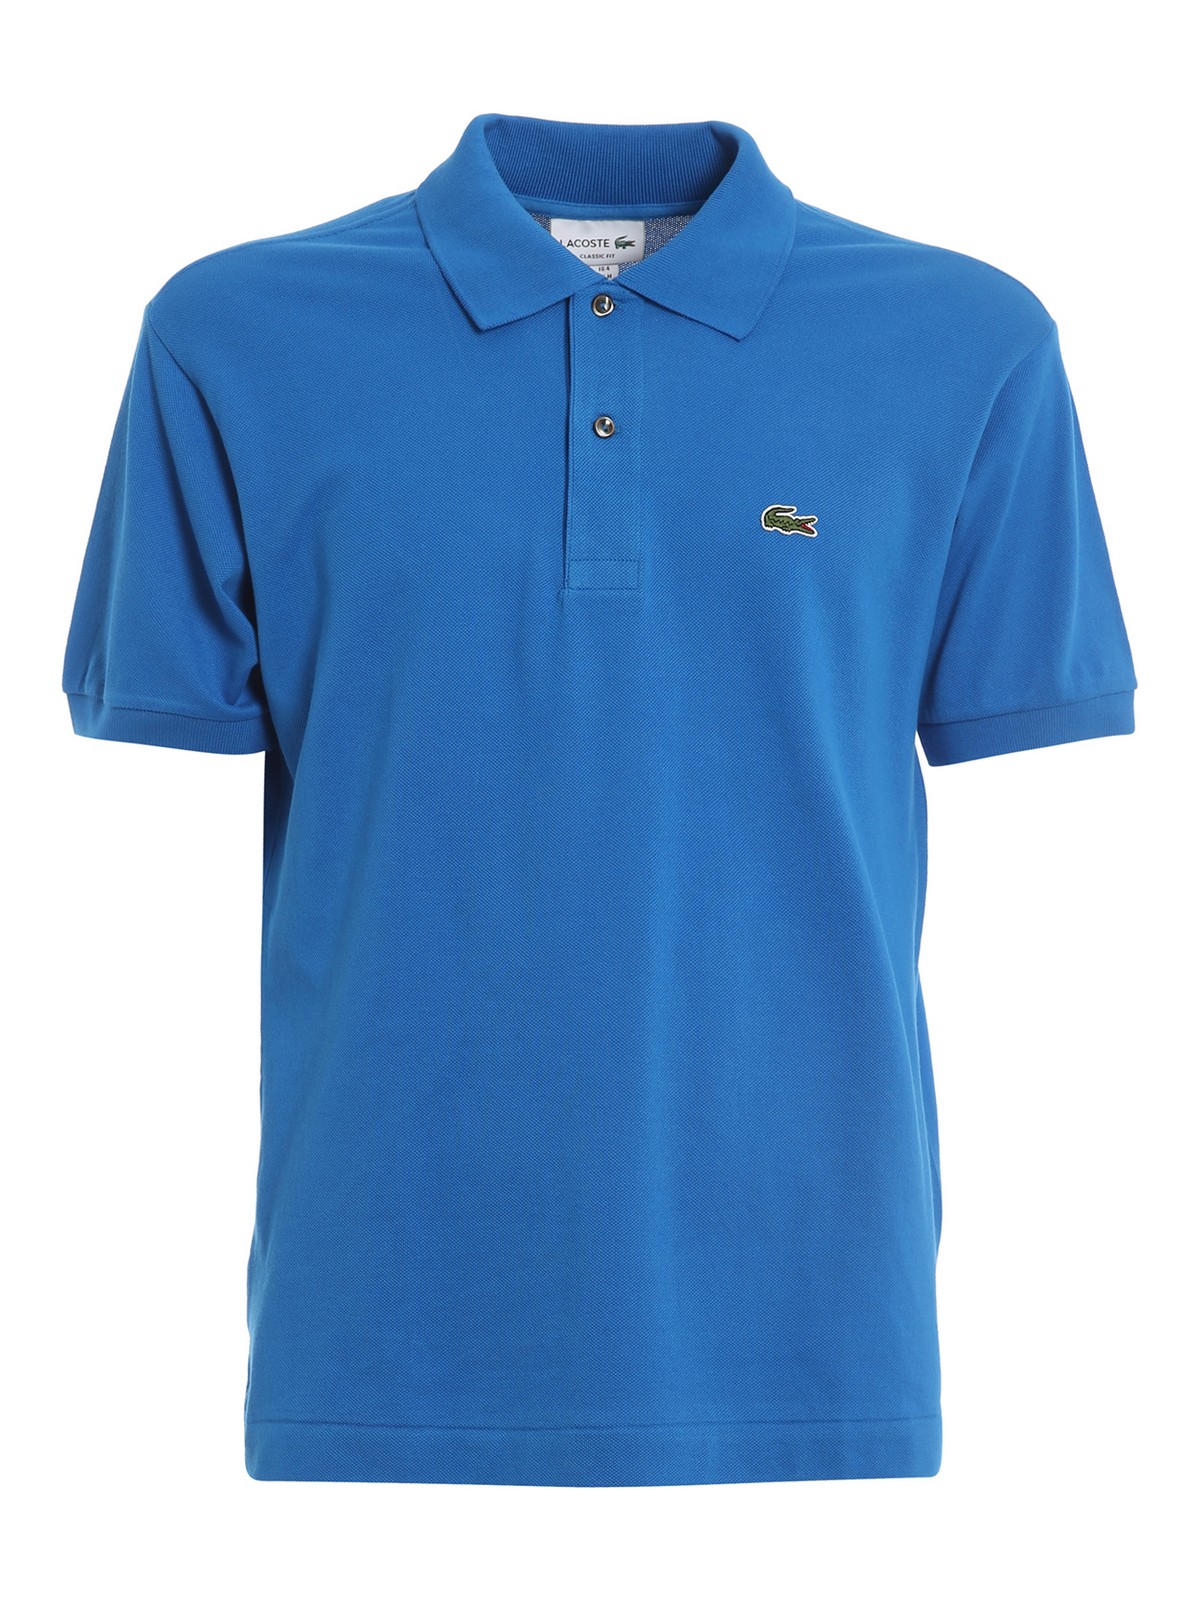 Polo Lacoste - Polo Classic Fit - L1212B9U | THEBS [iKRIX]